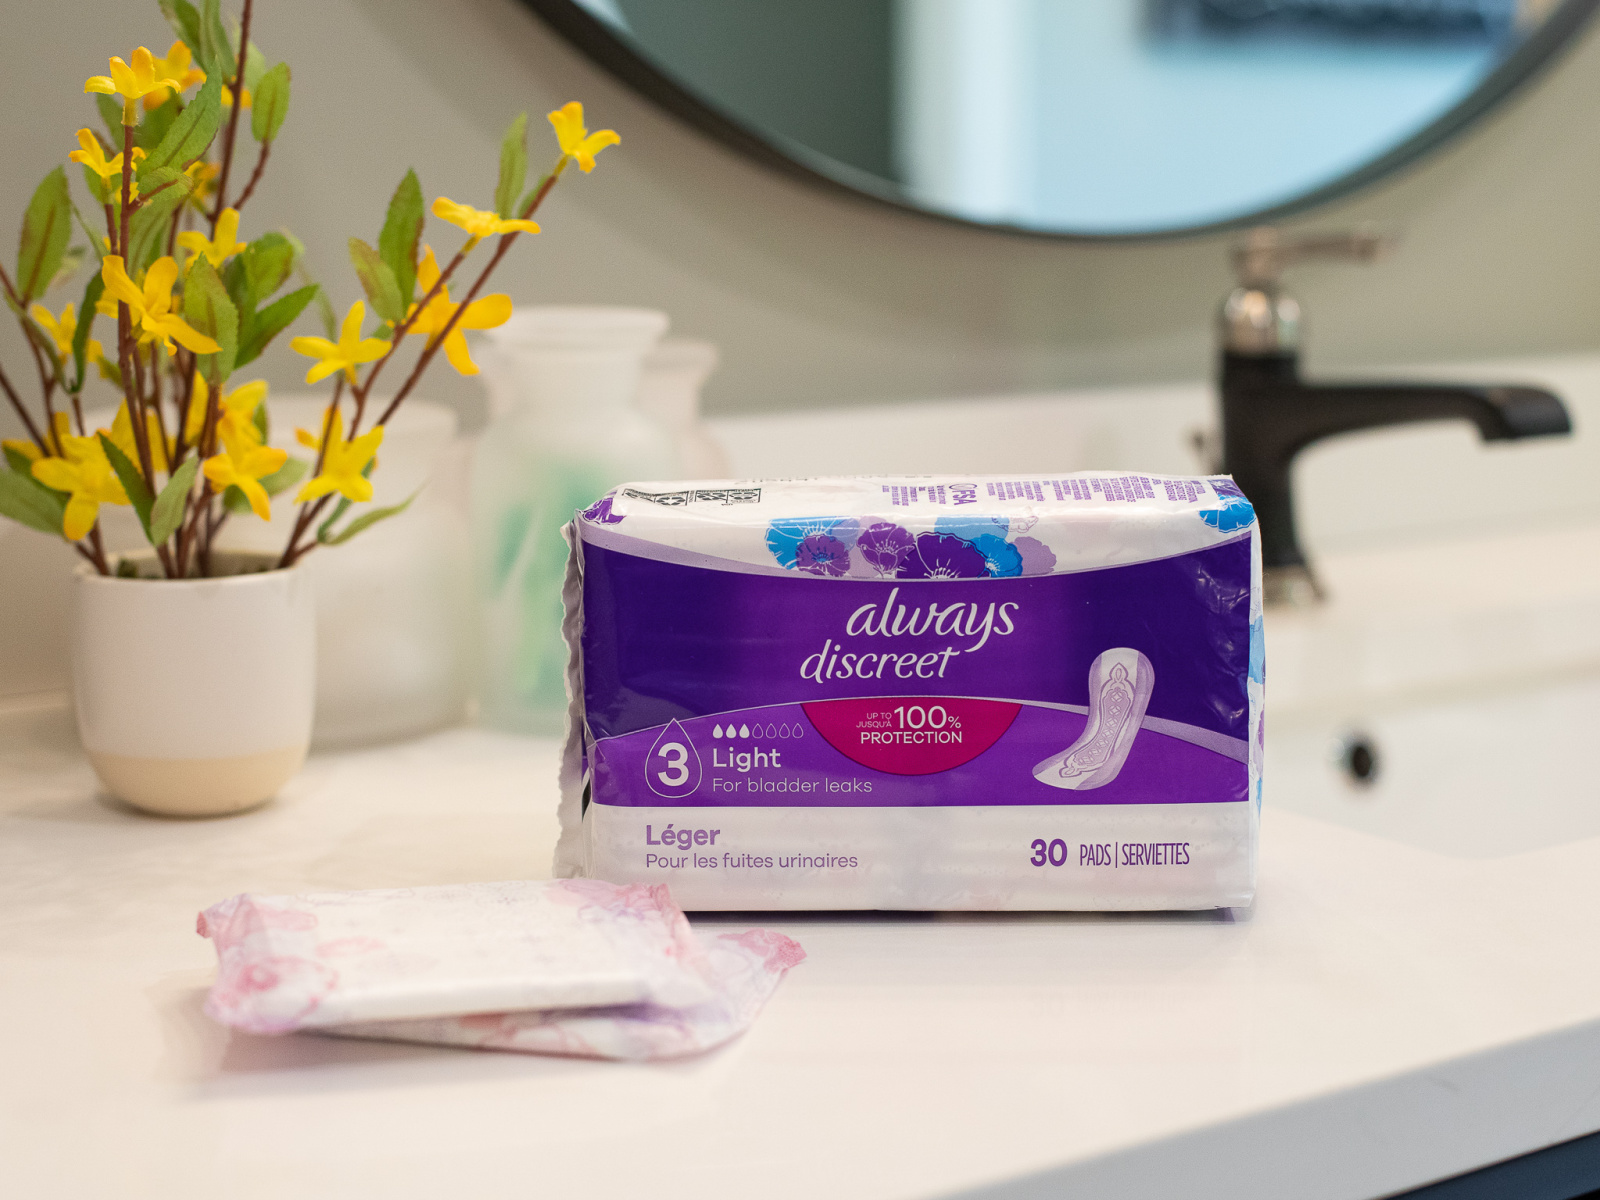 Always Discreet Pads As Low As 99¢ At Publix – Deal Ends 2/25